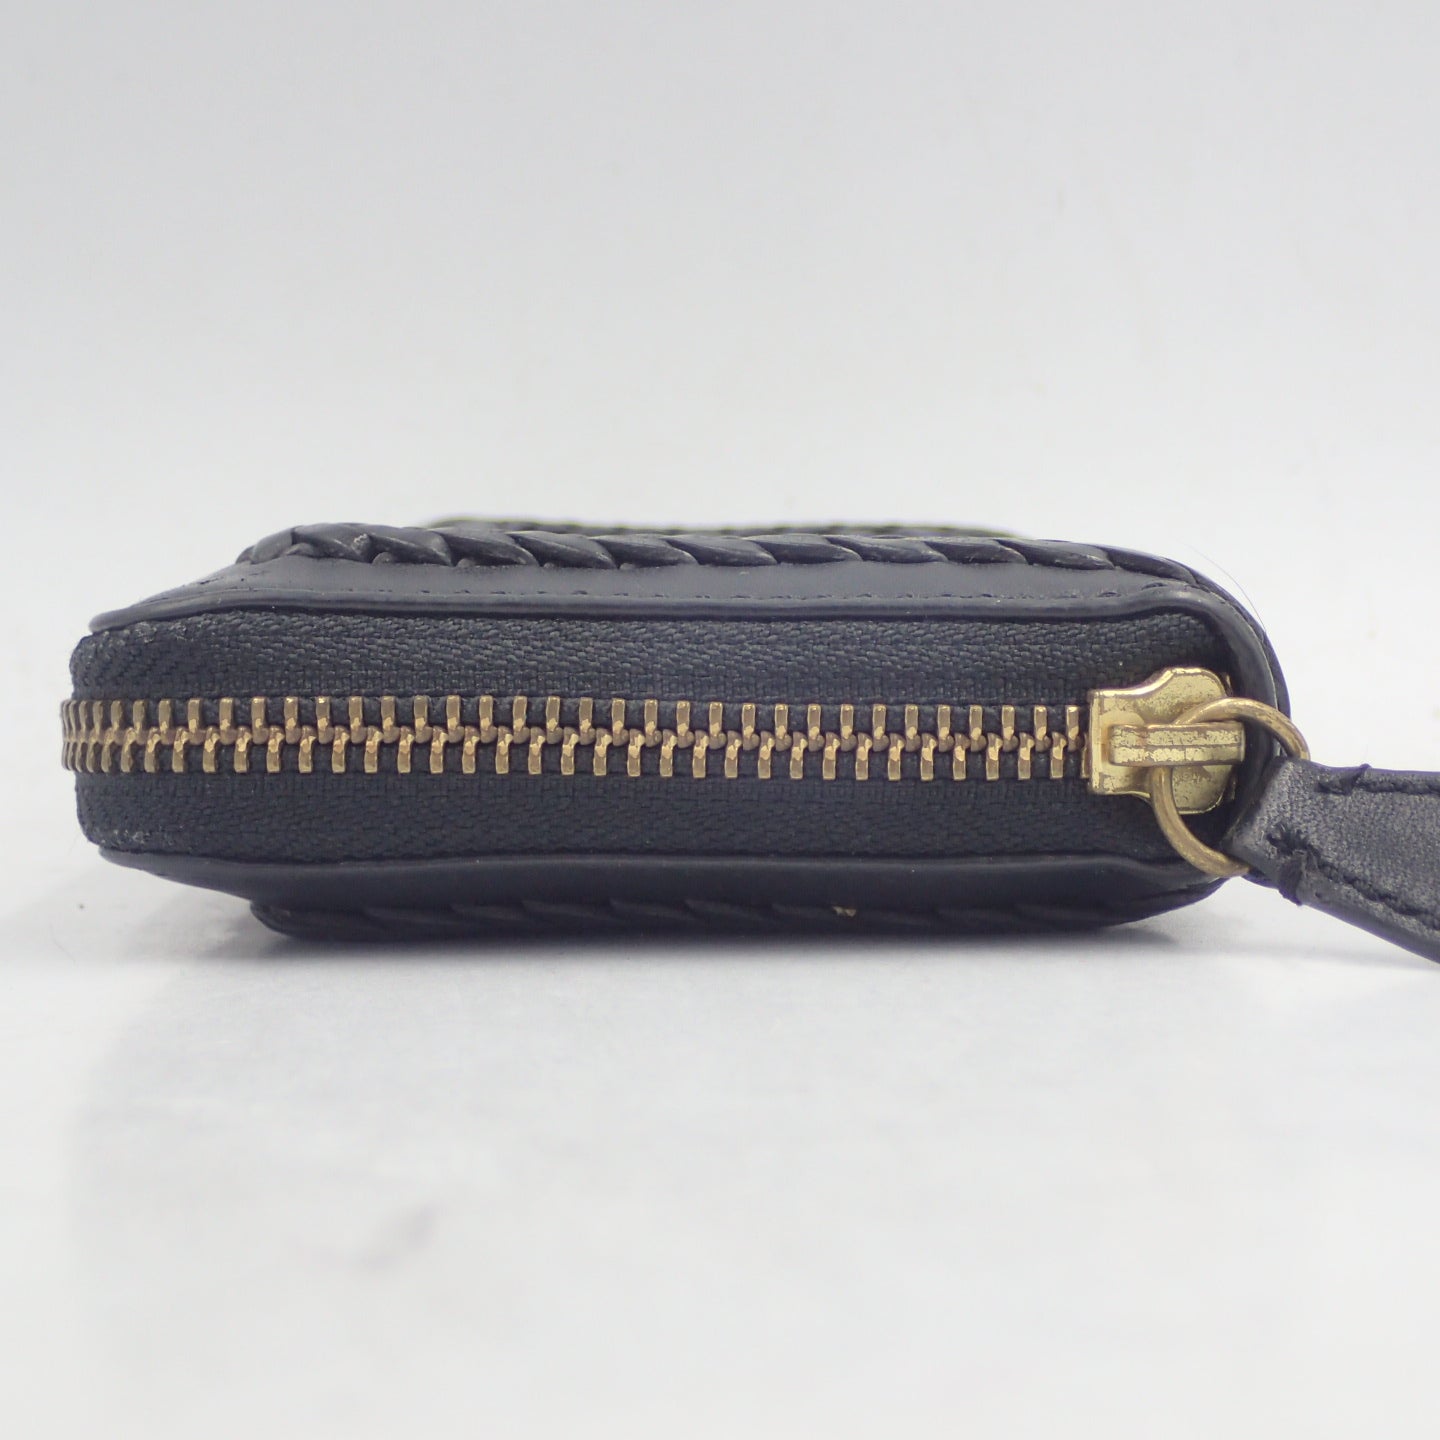 Polo Ralph Lauren Round Zip Wallet Leather Braided Black POLO RALPH LAUREN [AFI7] [Used] 